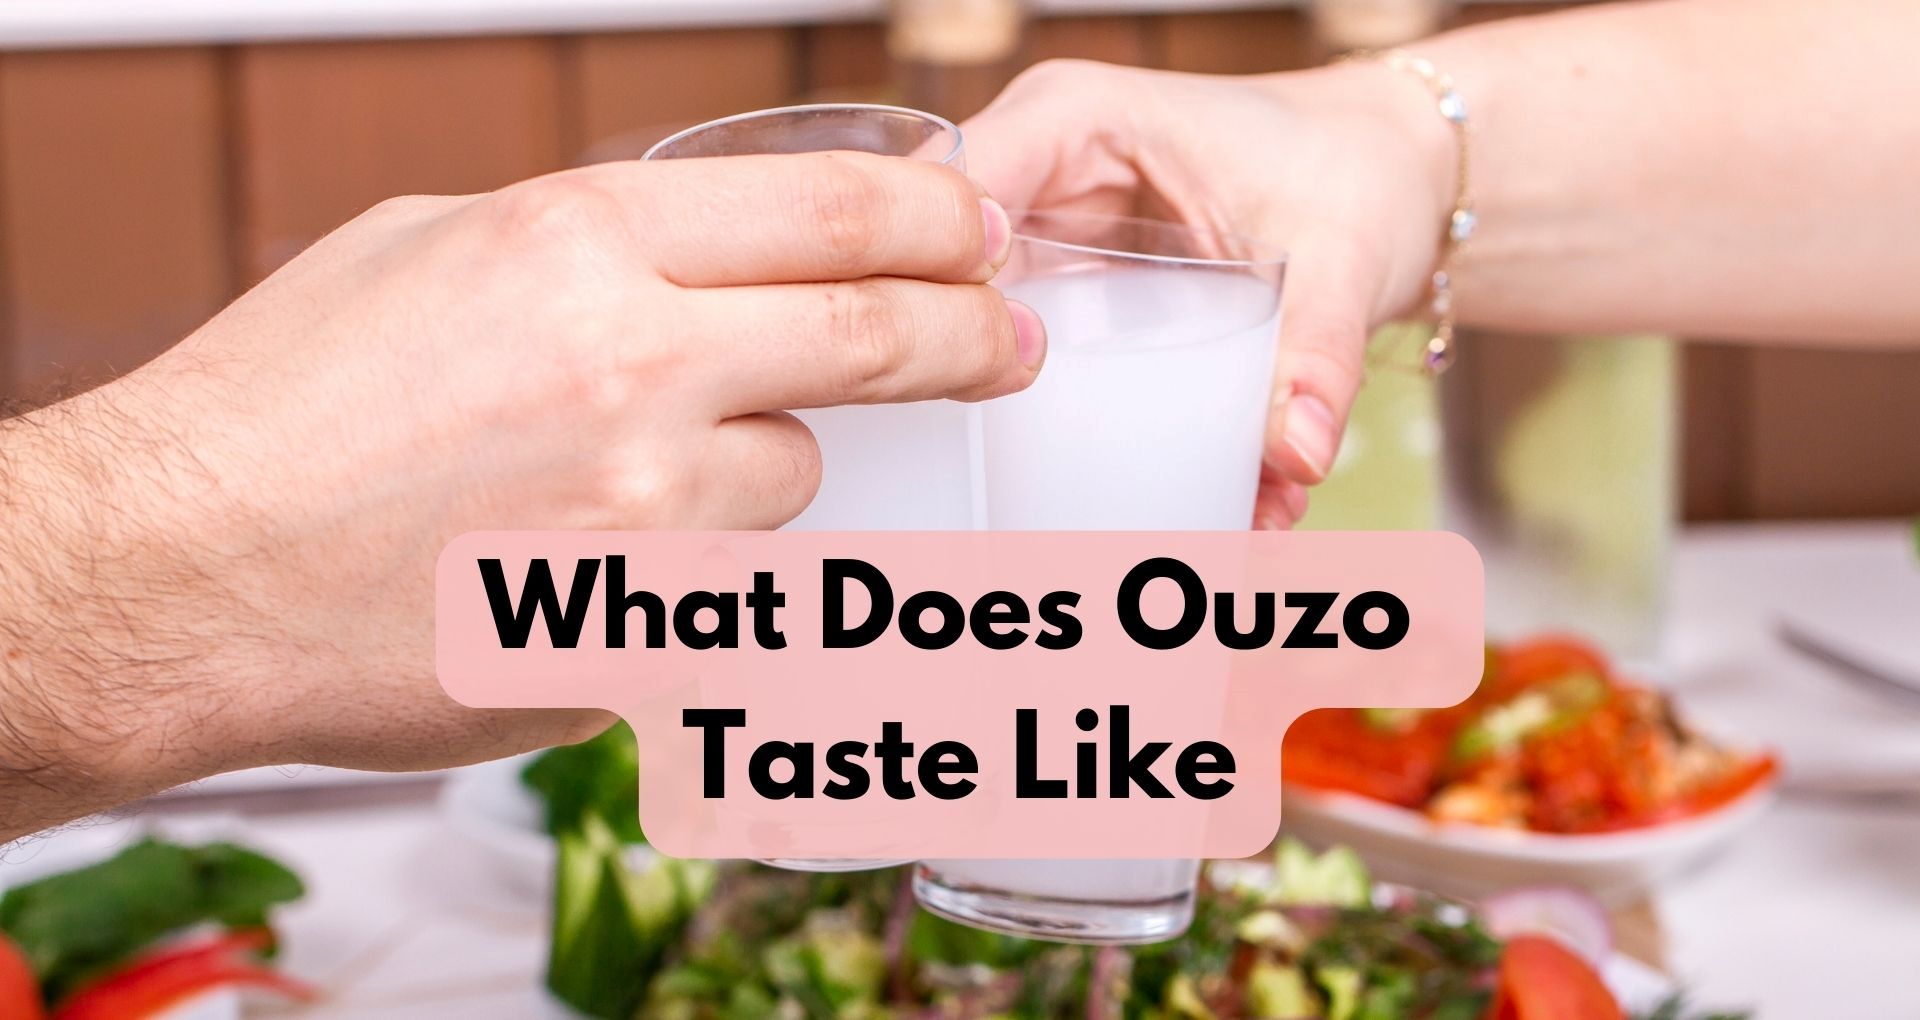 What Does Ouzo Taste Like?